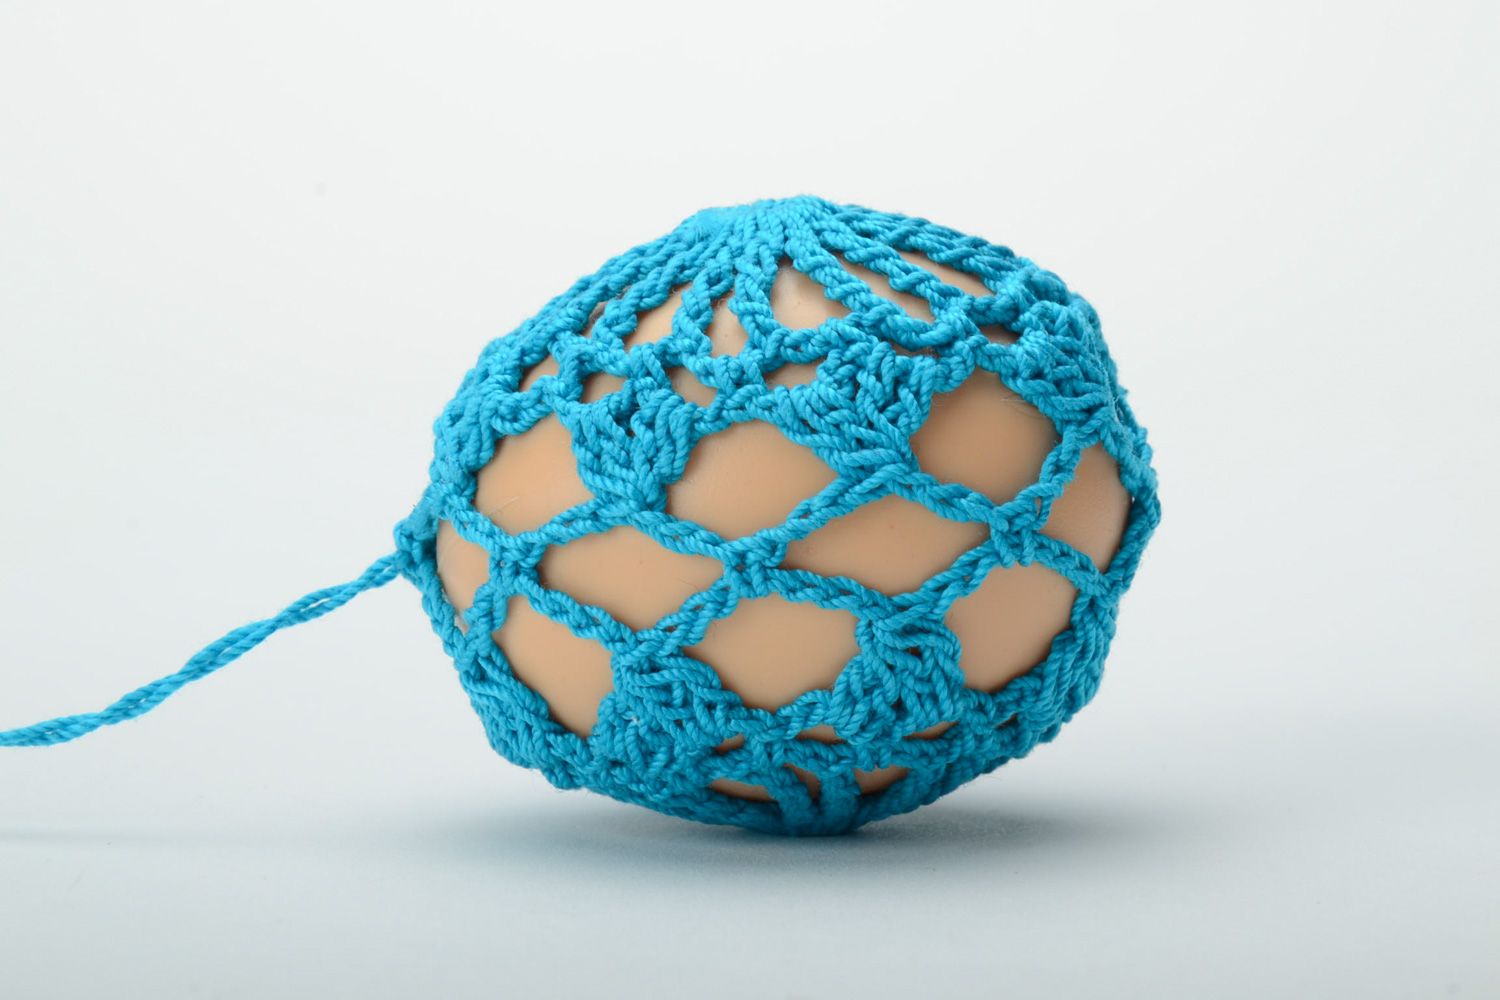 Homemade blue Easter egg crocheted over with cotton threads photo 4